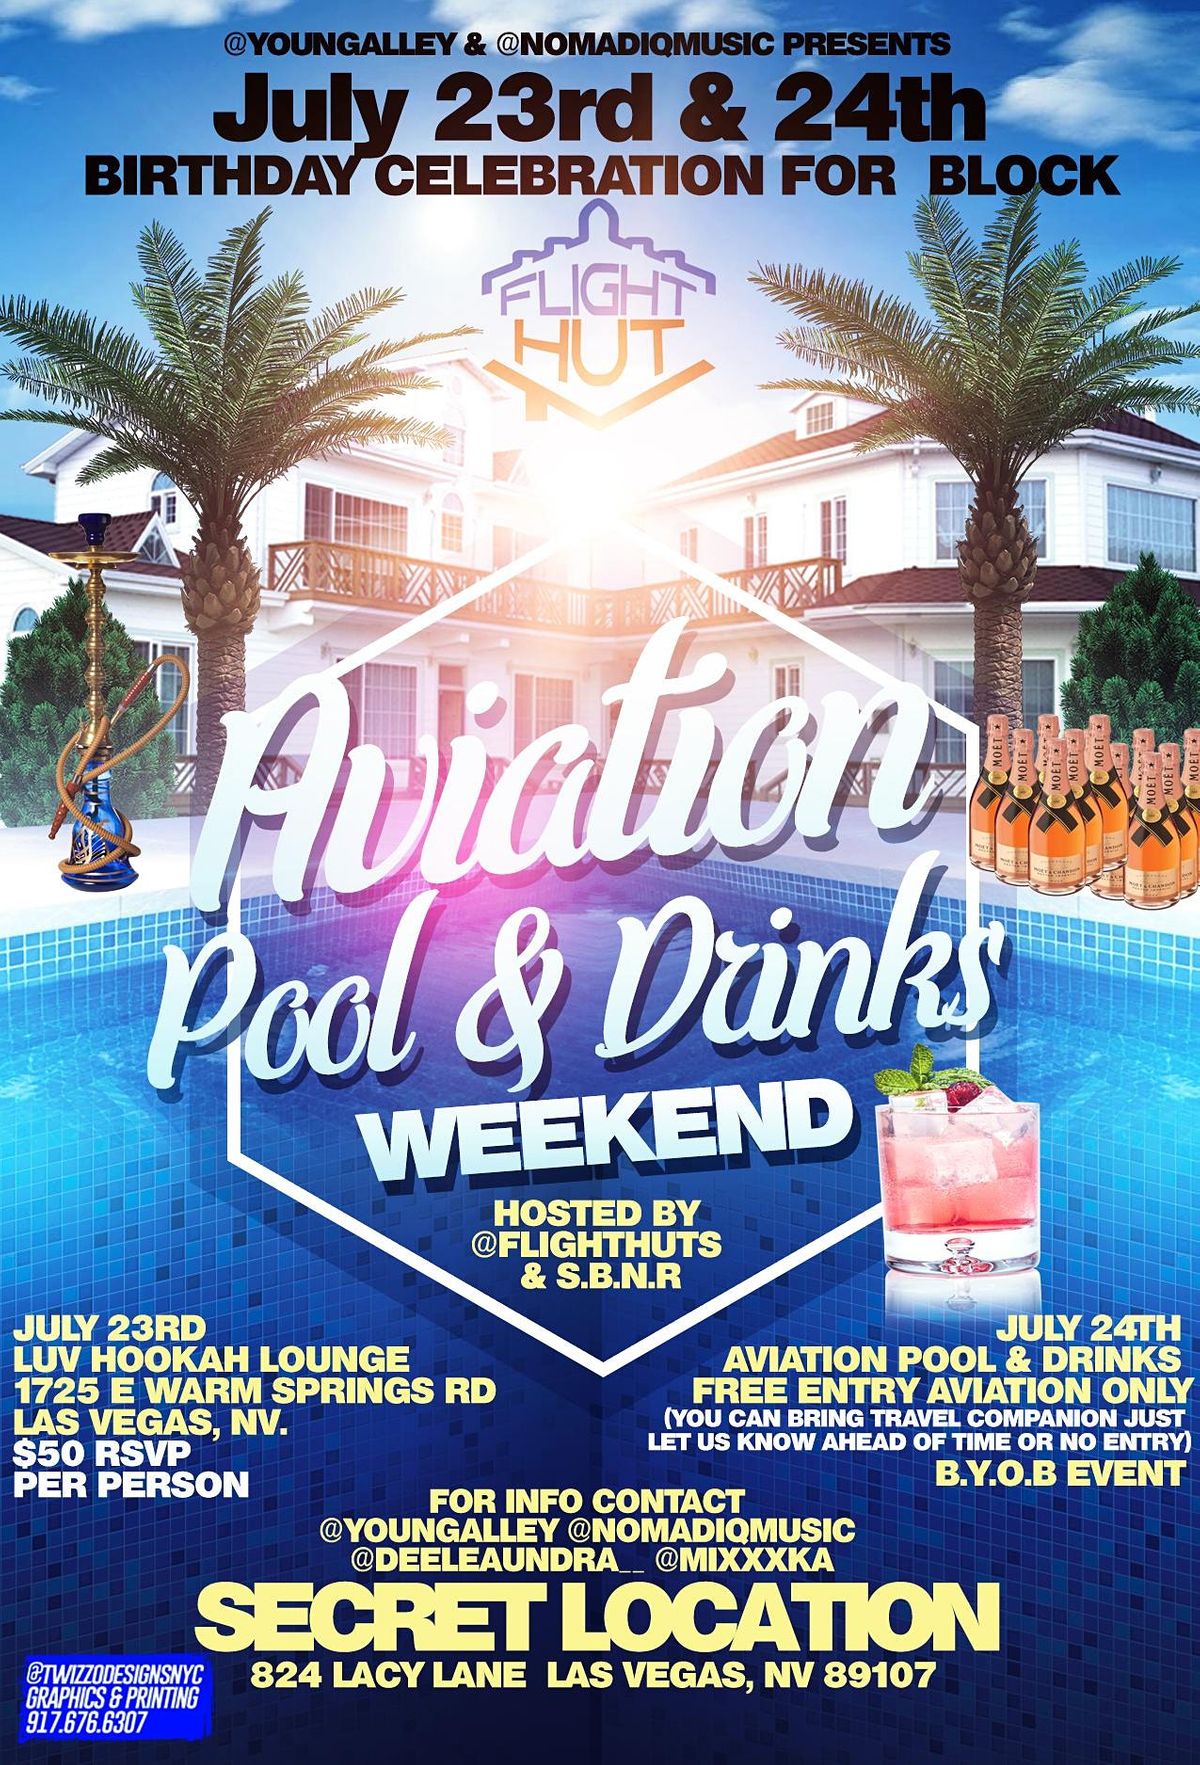 POOL PARTY AVIATION POOL & DRINKS